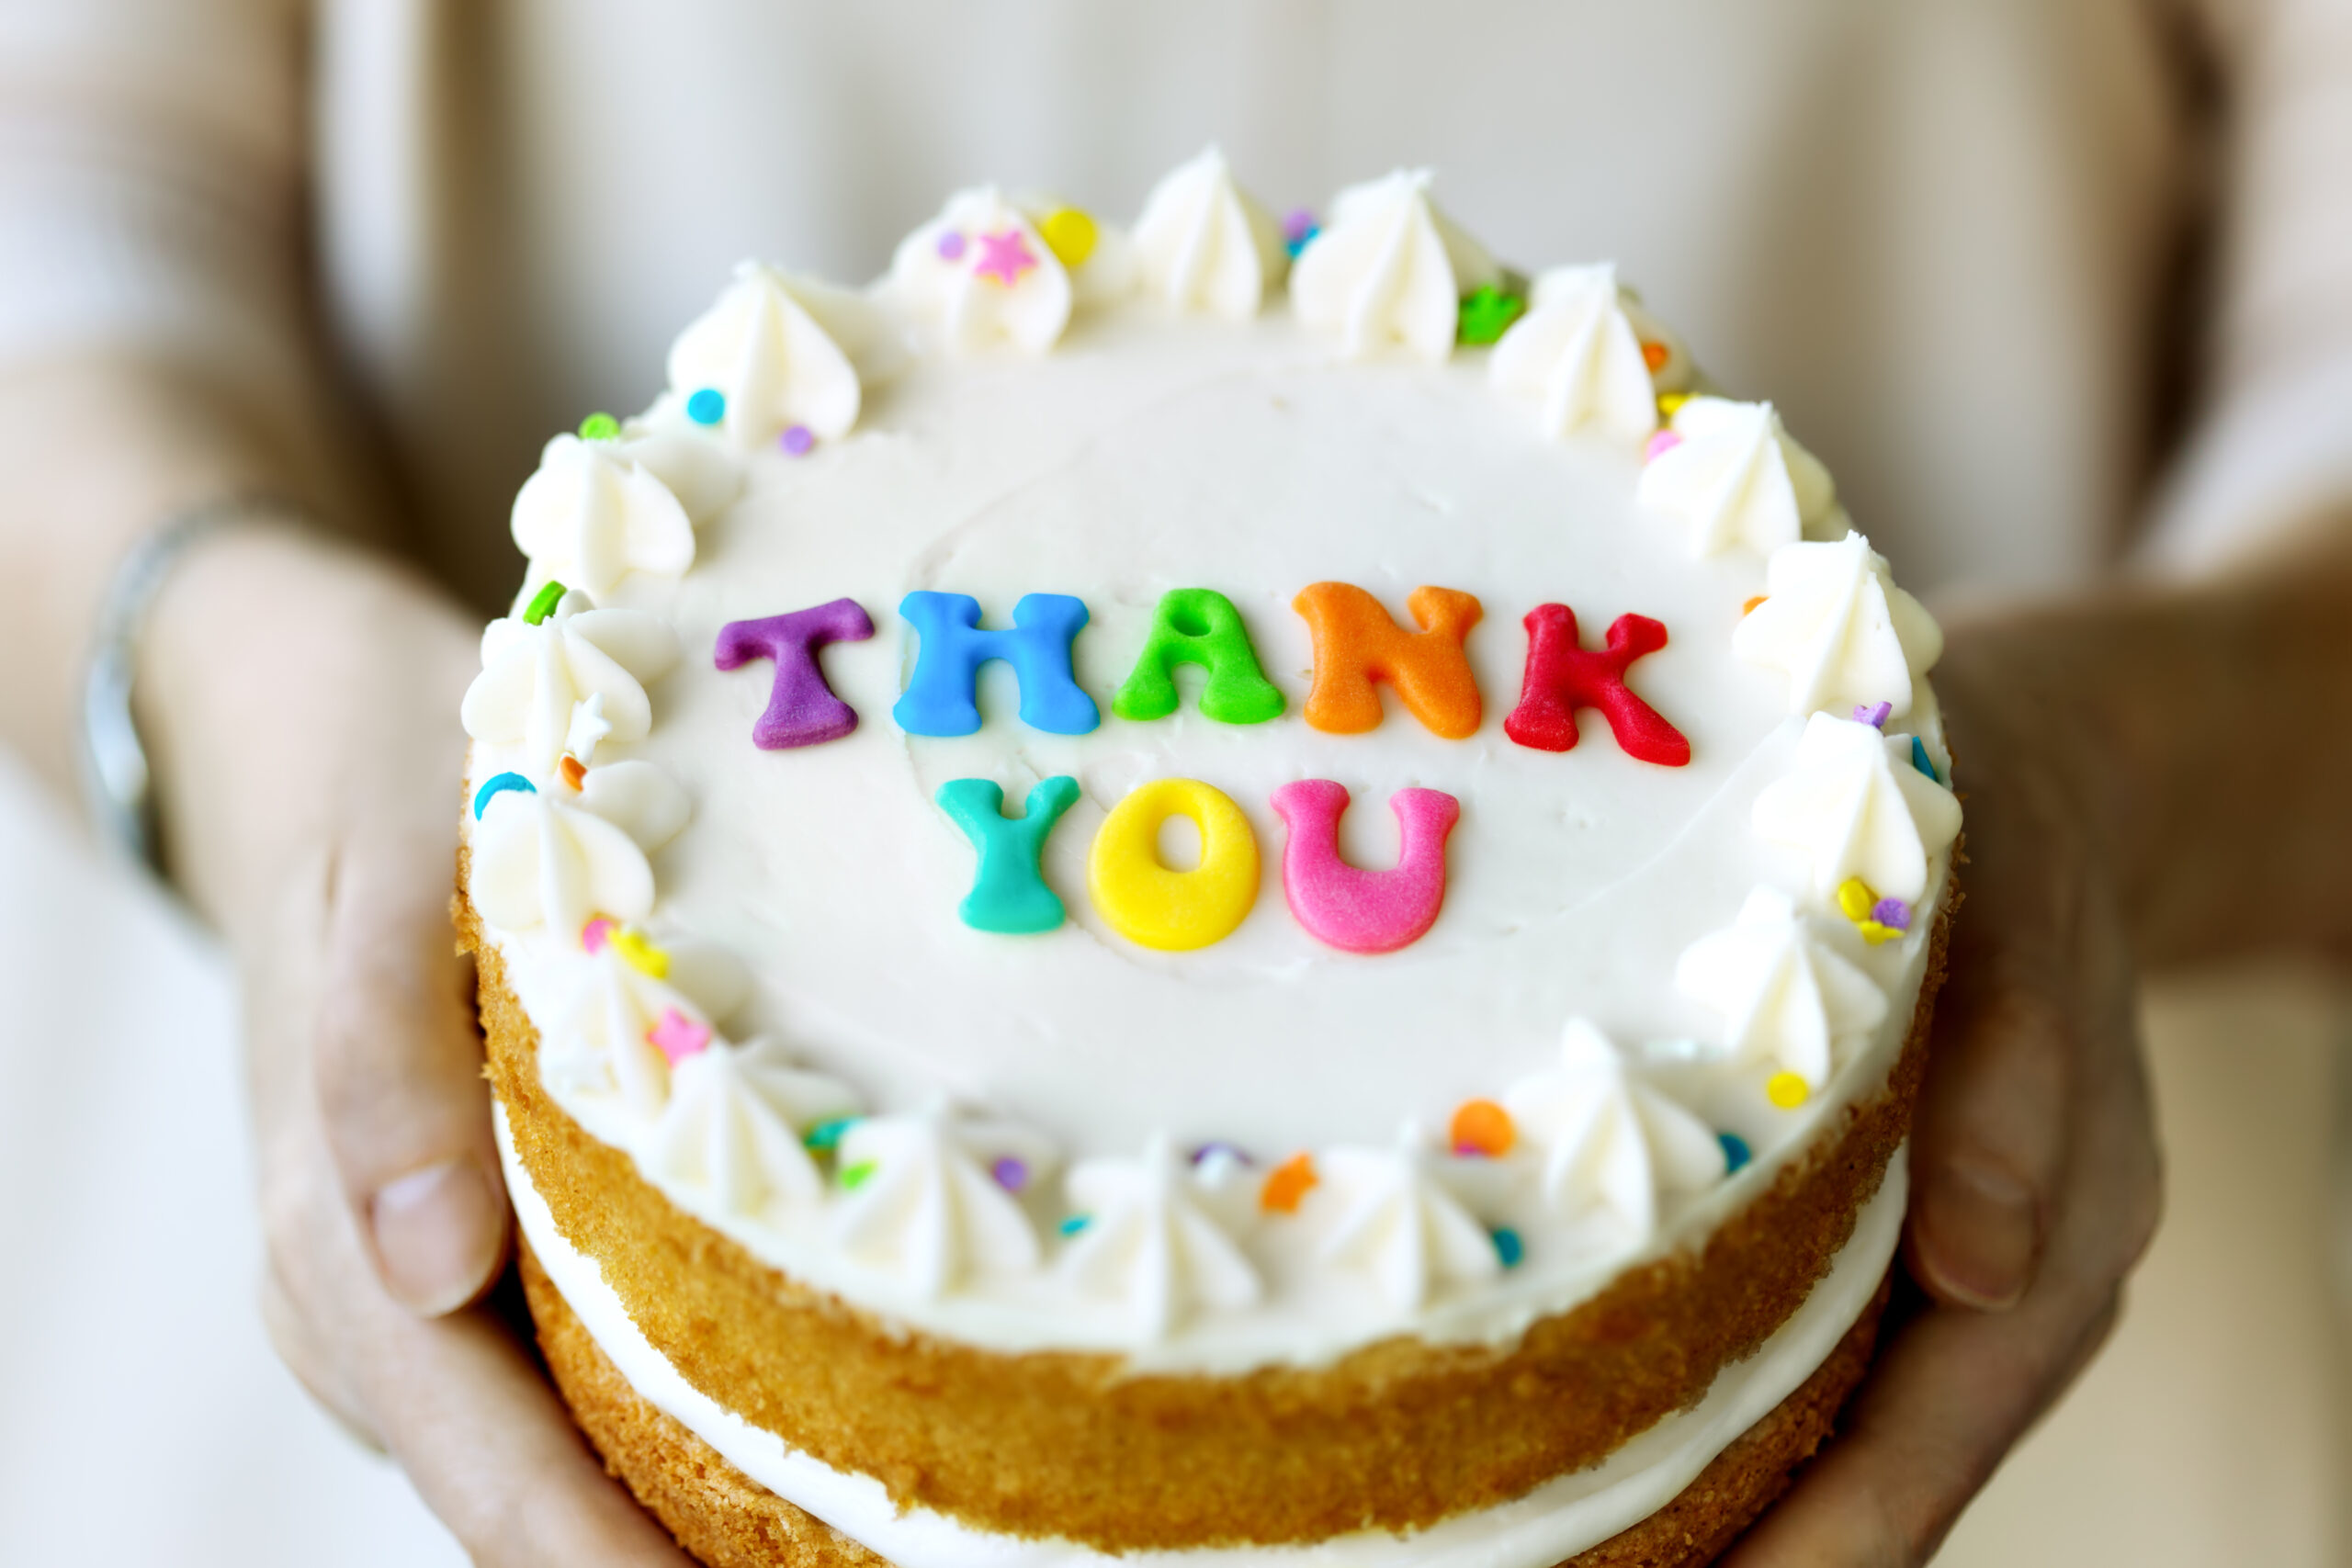 Hands holding cake with colorful rainbow letters spelling thank you